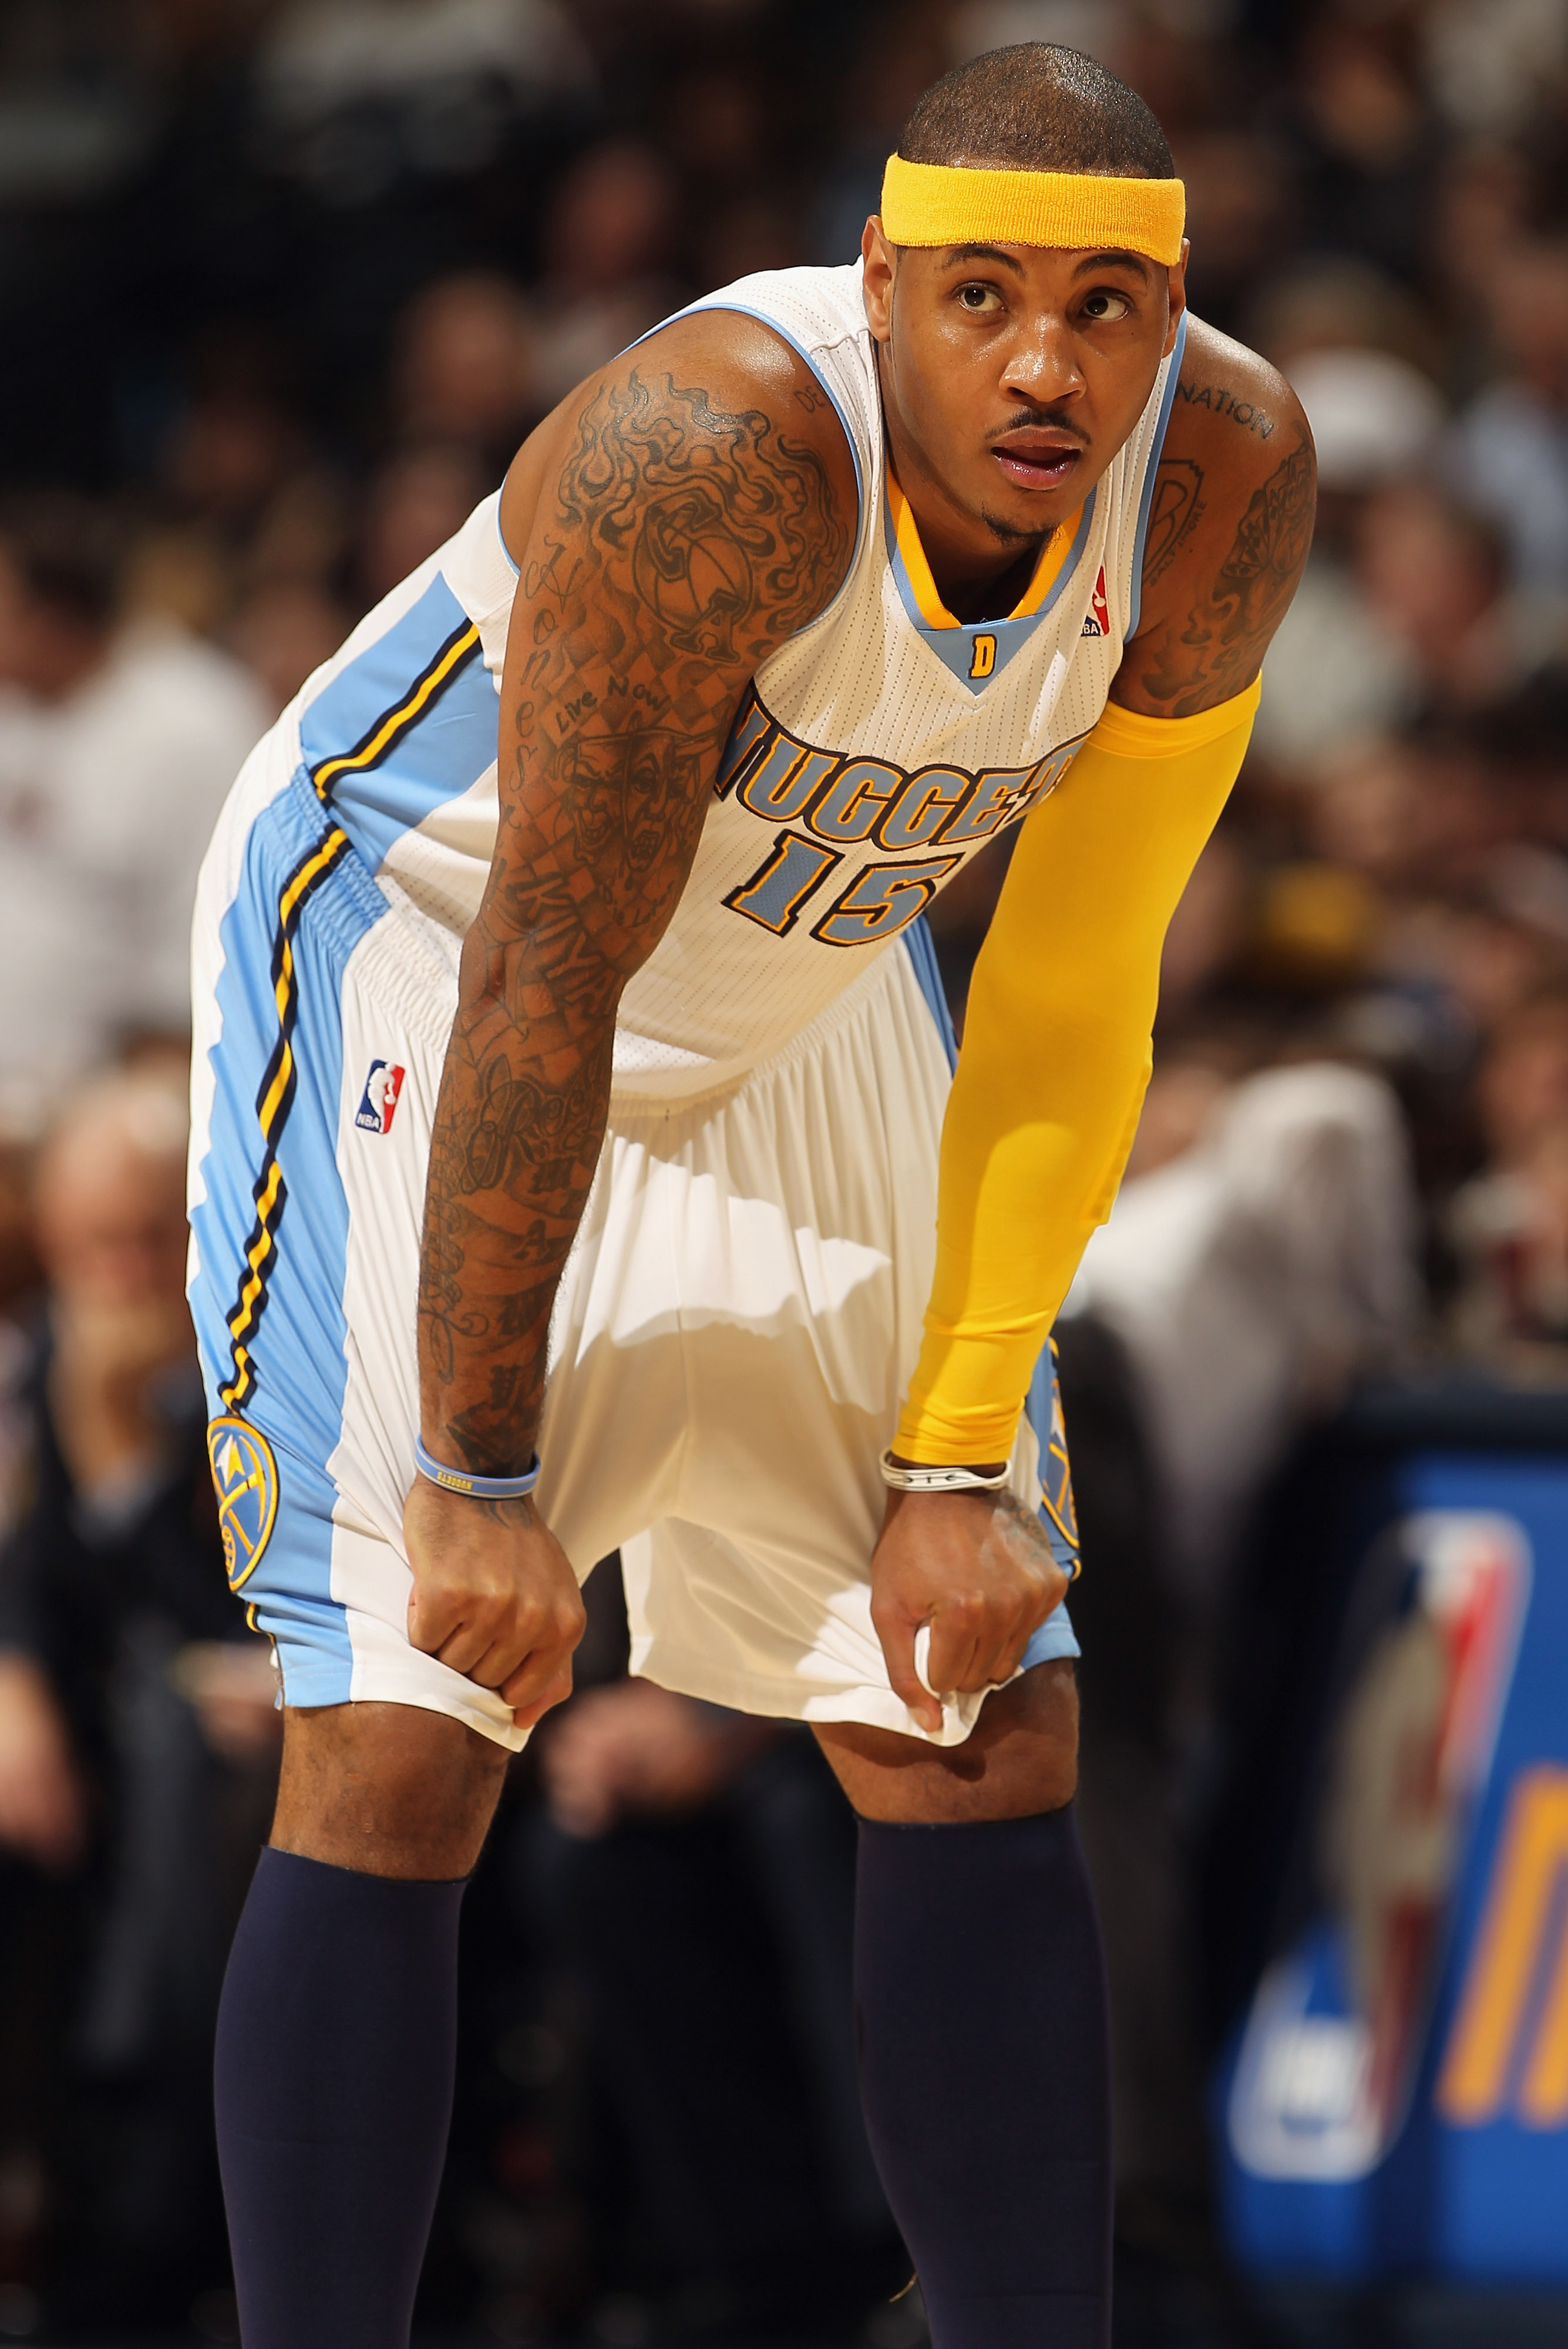 DENVER, CO - JANUARY 13:  Carmelo Anthony #15 of the Denver Nuggets looks on during a break in the action against the Miami Heat at the Pepsi Center on January 13, 2011 in Denver, Colorado. The Nuggets defeated the Heat 130-102. NOTE TO USER: User express